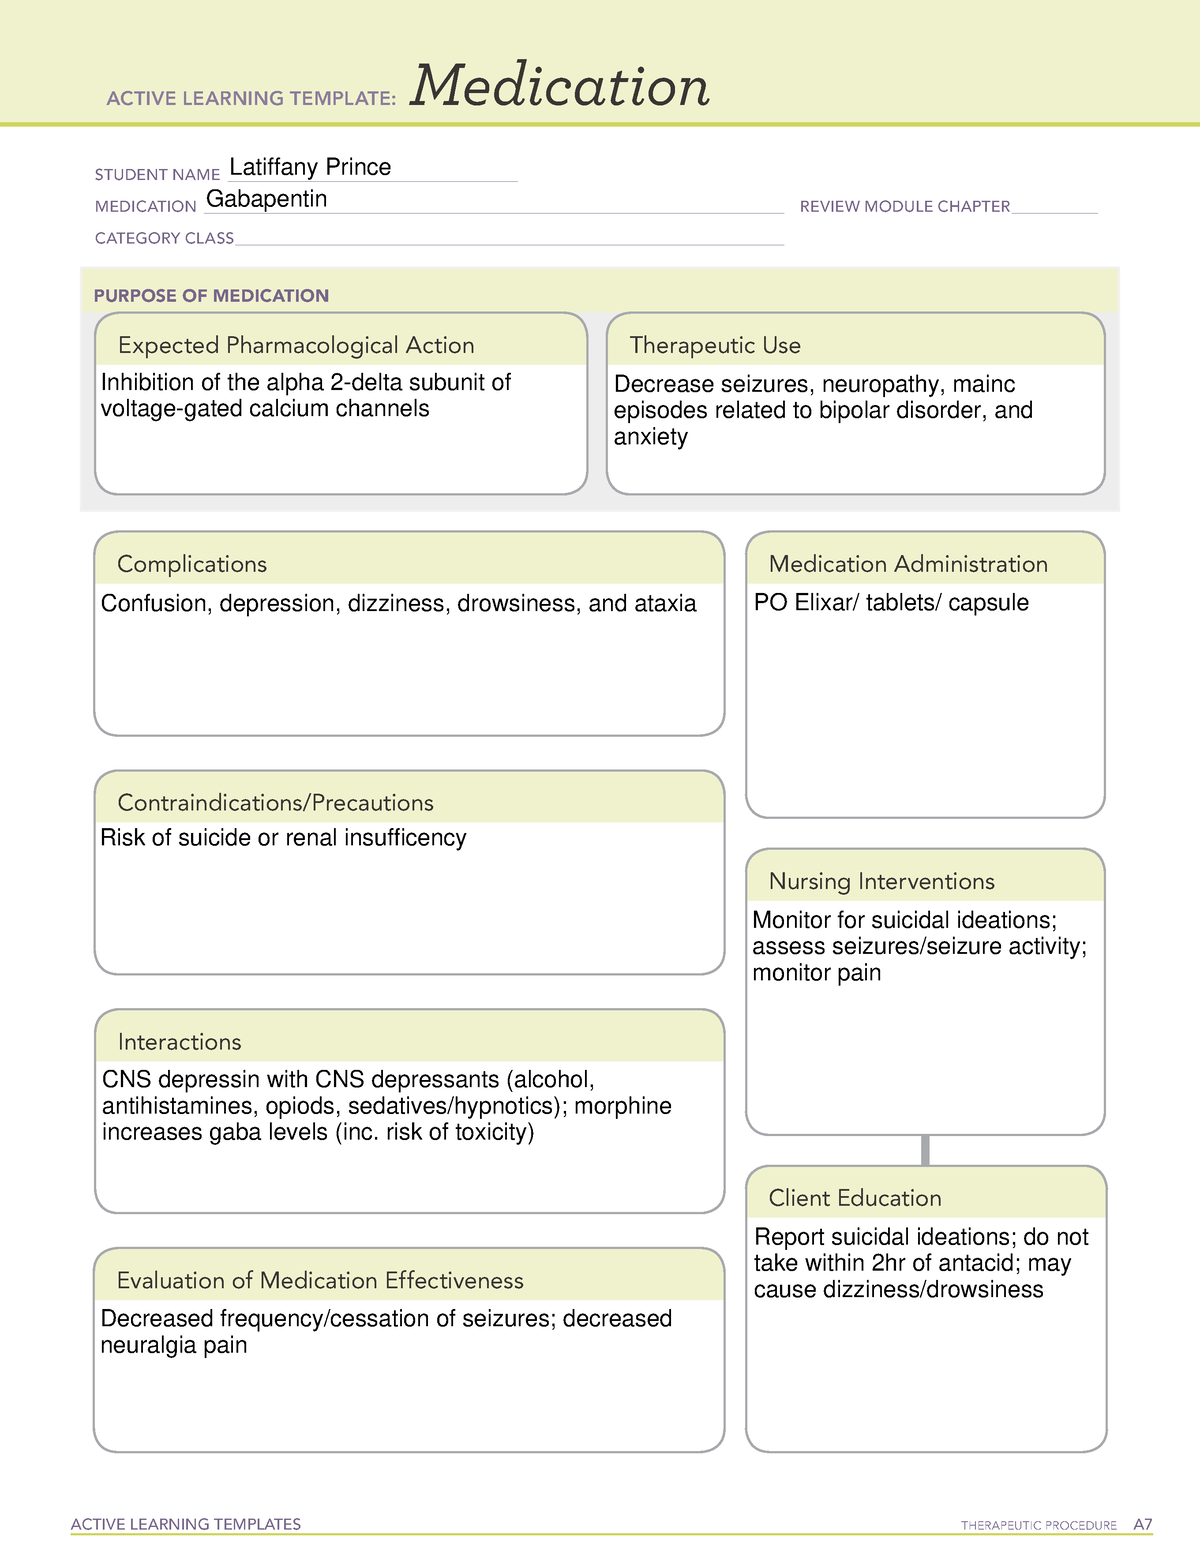 gabapentin-med-template-active-learning-templates-therapeutic-procedure-a-medication-student